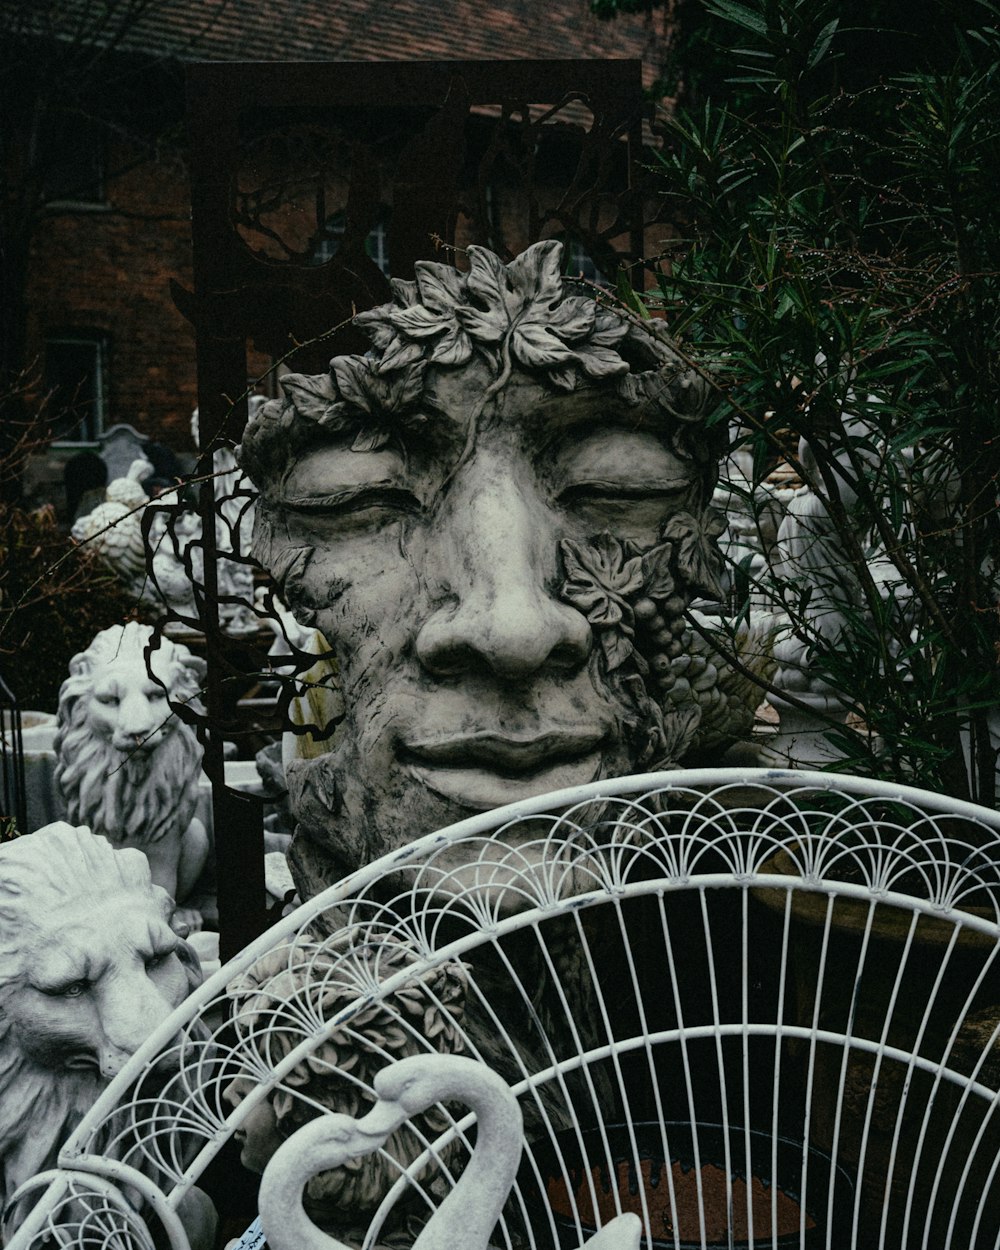 a statue of a face surrounded by other statues